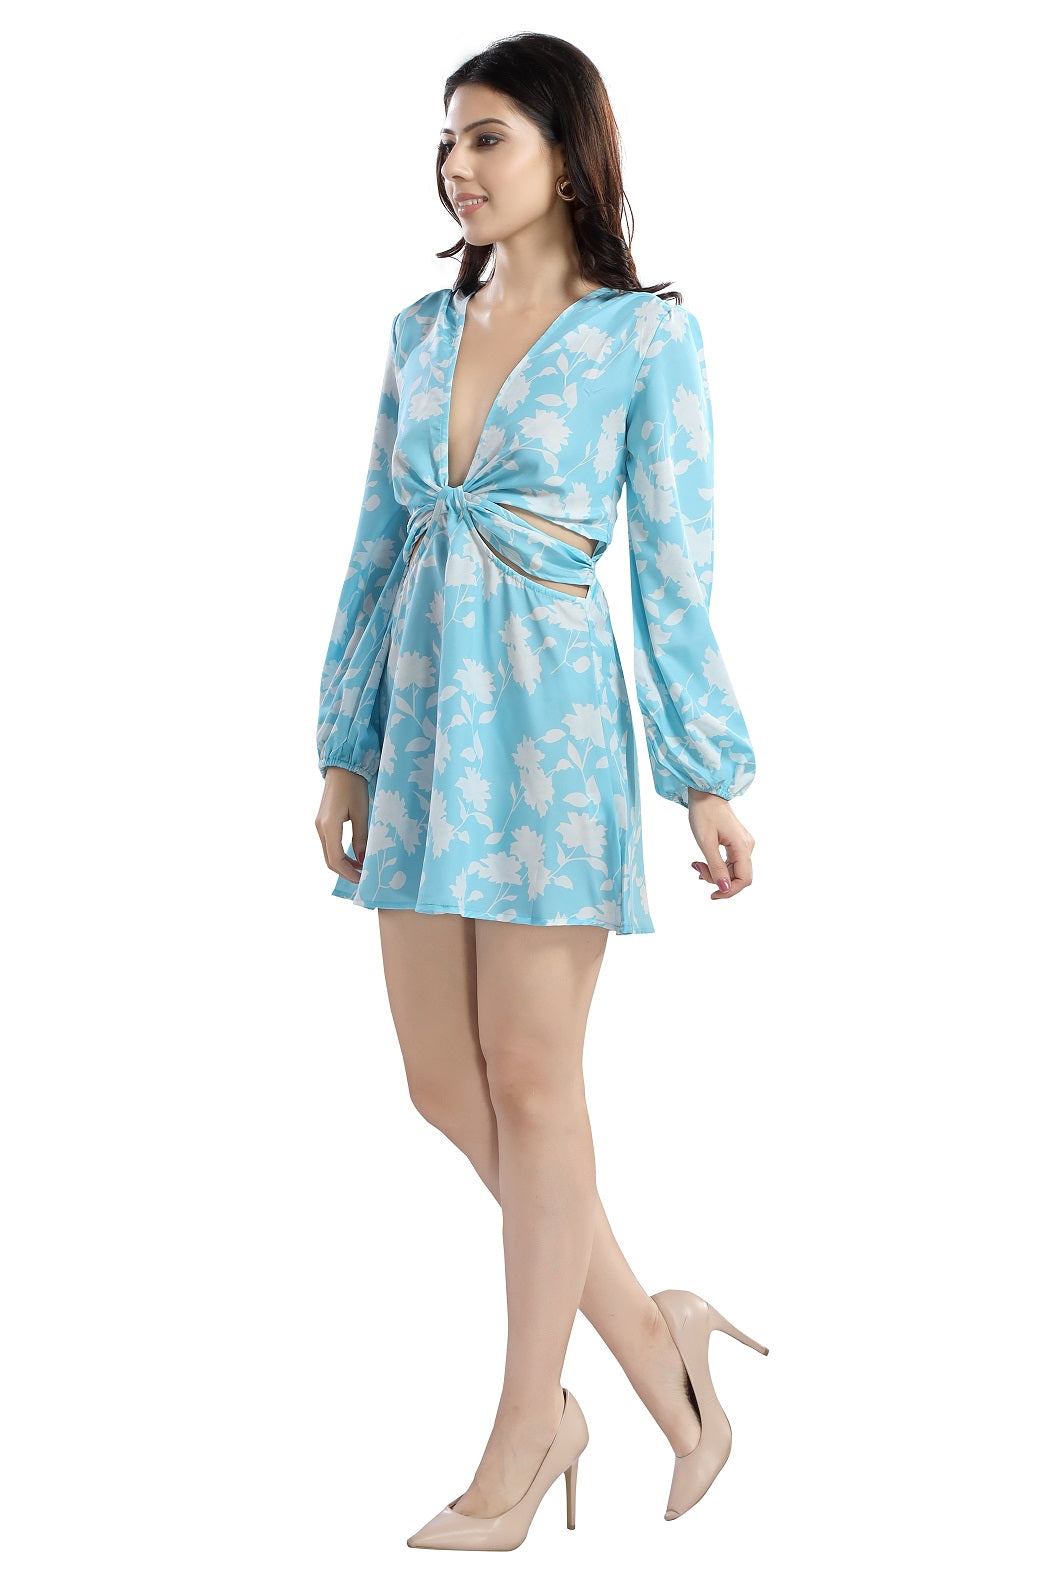 Cherrylavish Blue & White Floral Print Crepe Fit & Flare Dress With Cut-outs